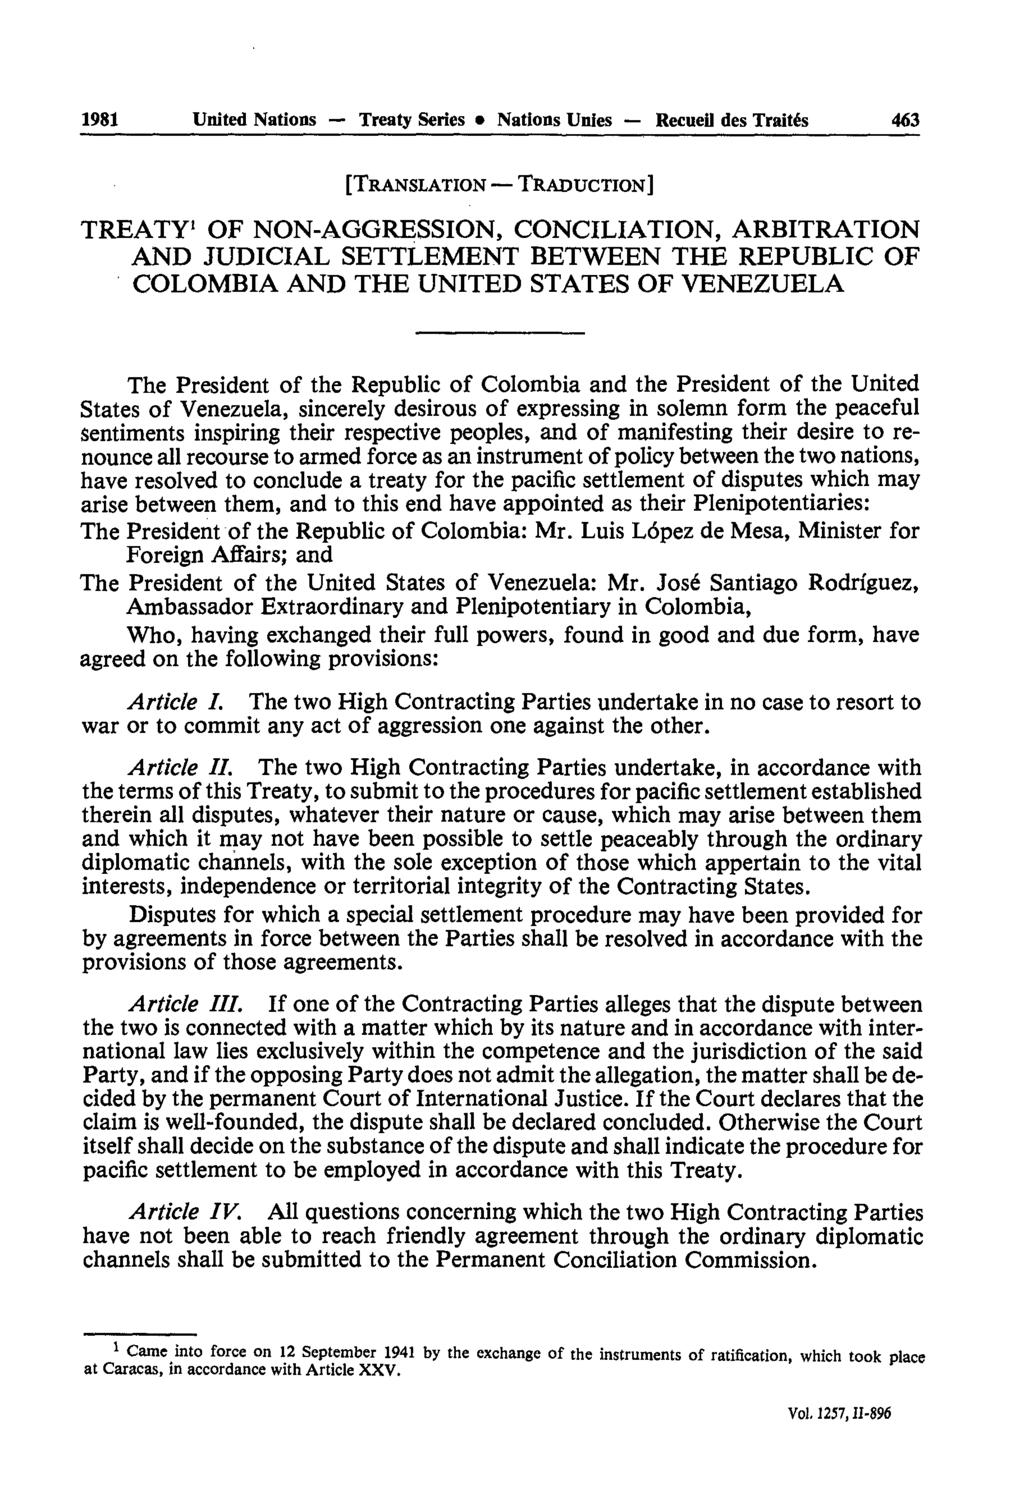 1981 United Nations Treaty Series Nattons Unies Reçue» des Traités 463 [TRANSLATION TRADUCTION] TREATY 1 OF NON-AGGRESSION, CONCILIATION, ARBITRATION AND JUDICIAL SETTLEMENT BETWEEN THE REPUBLIC OF